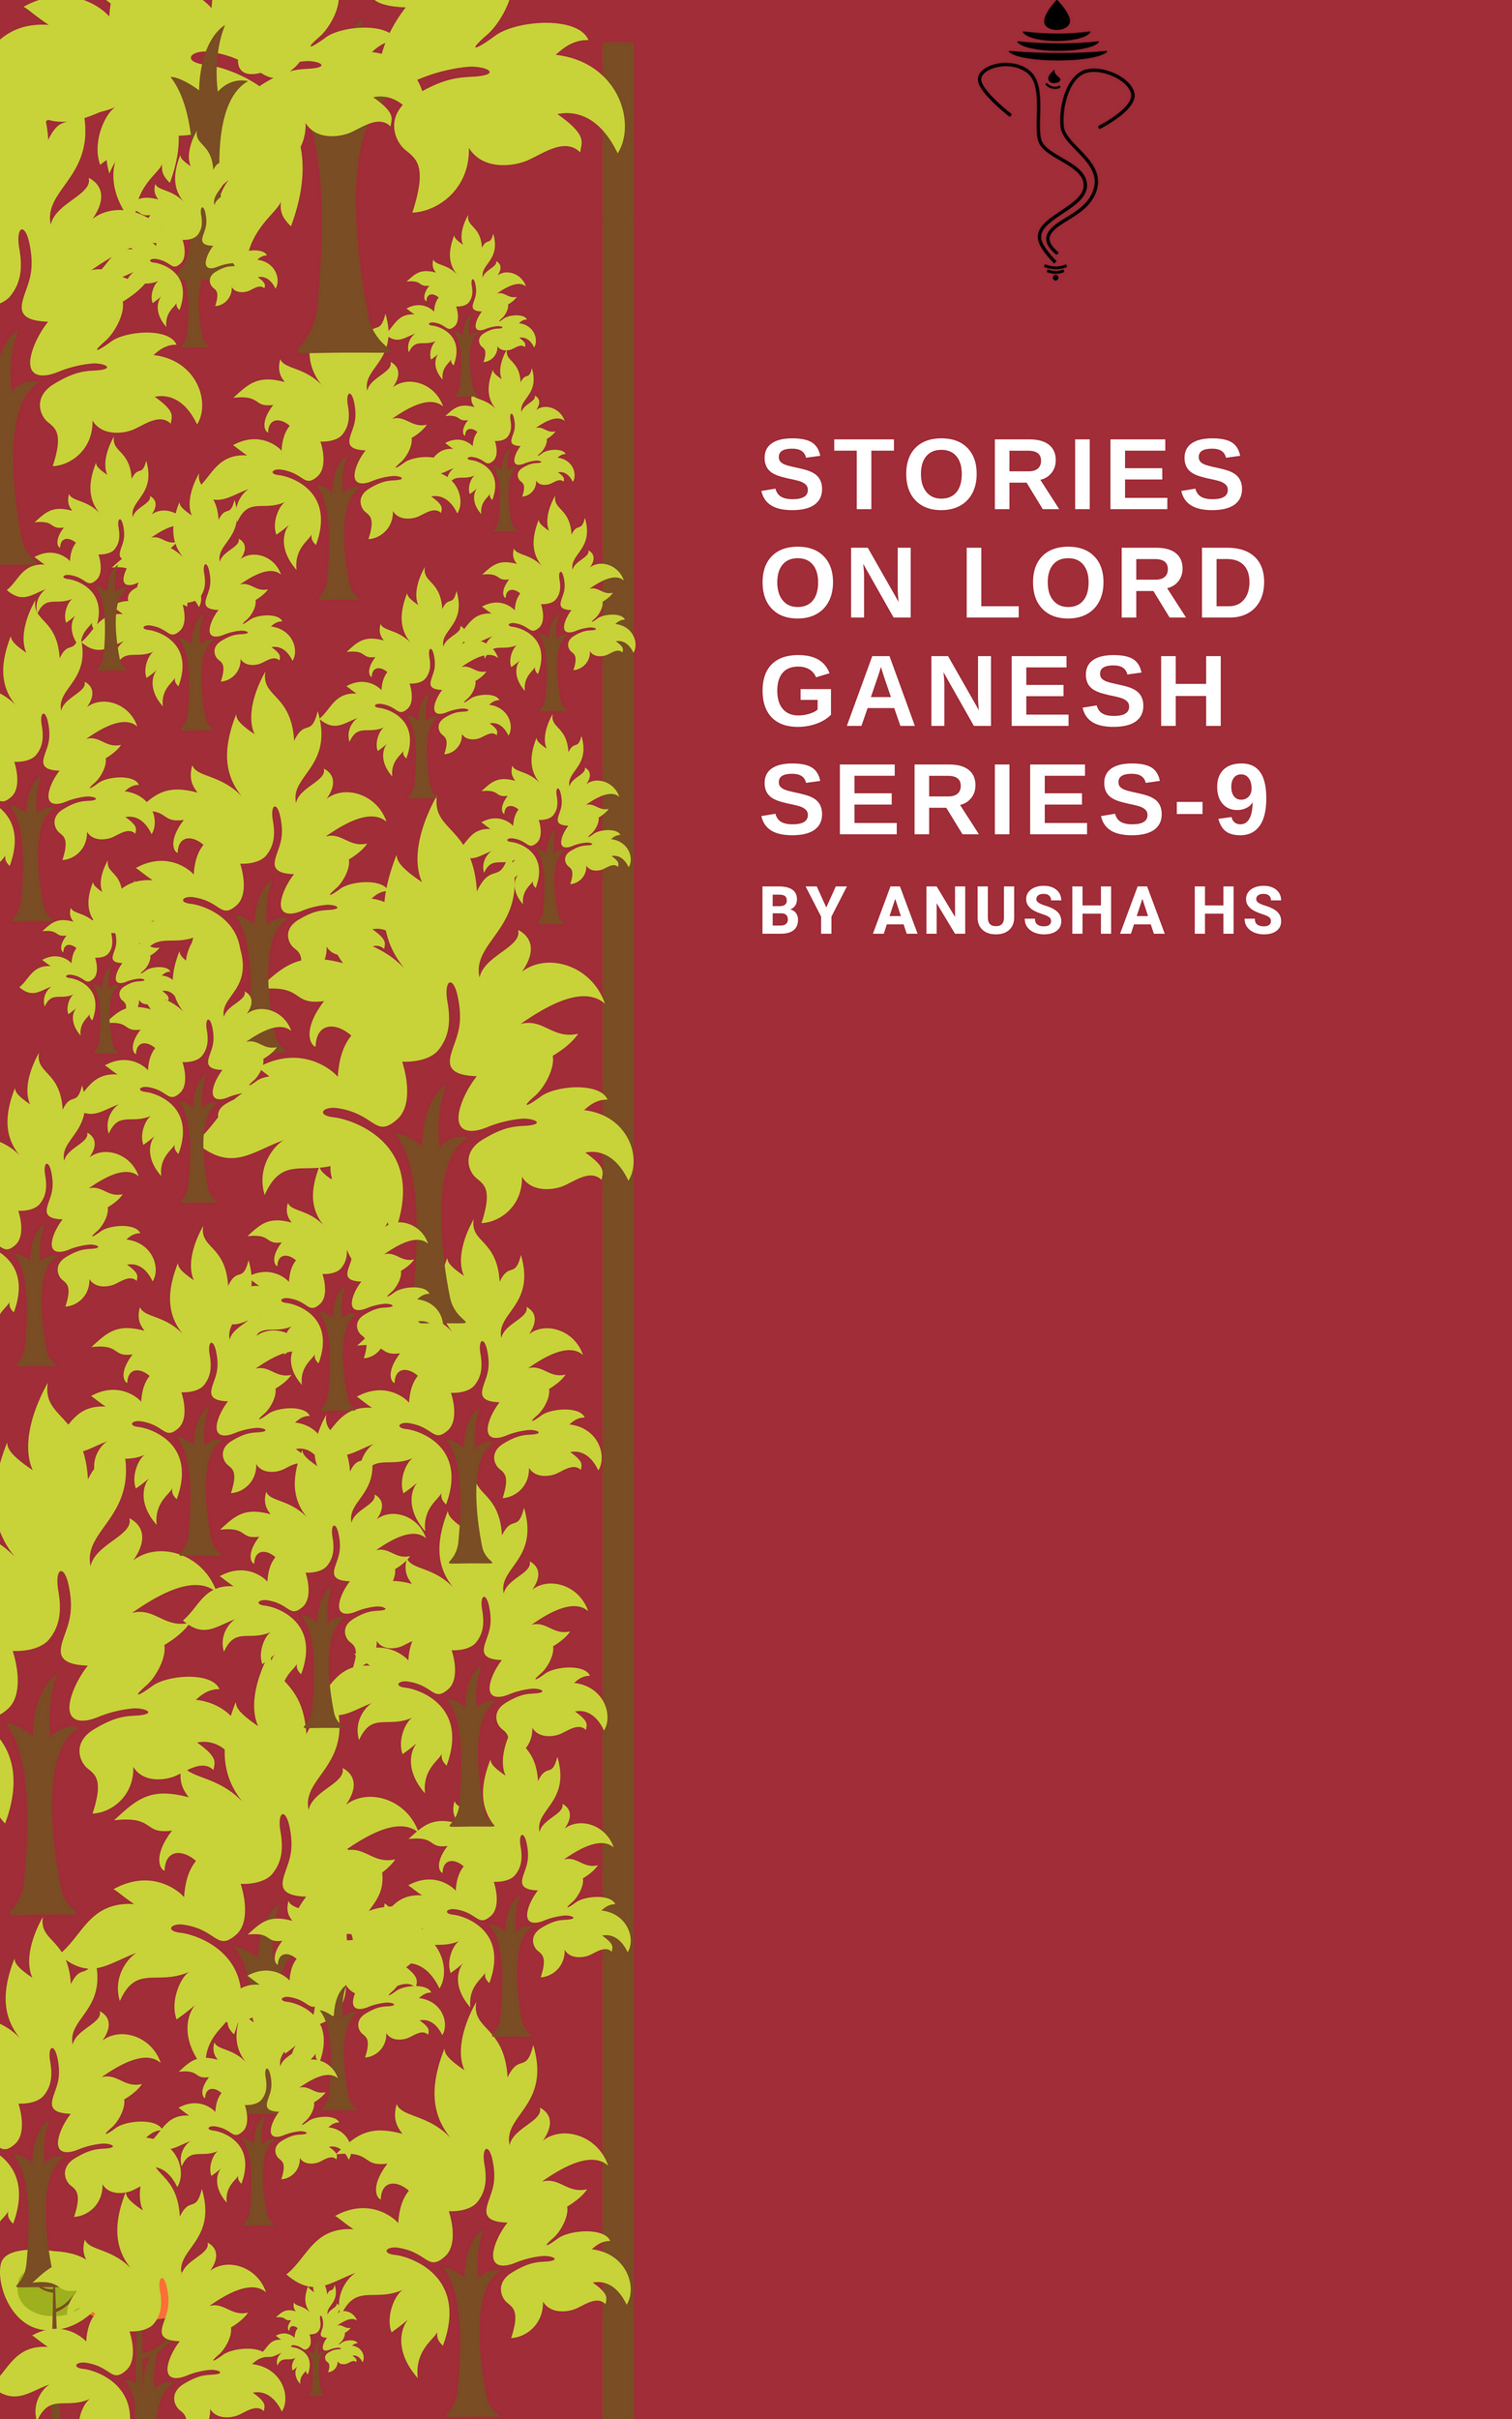 FREE: Stories on lord Ganesh series-9 by ANUSHA HS